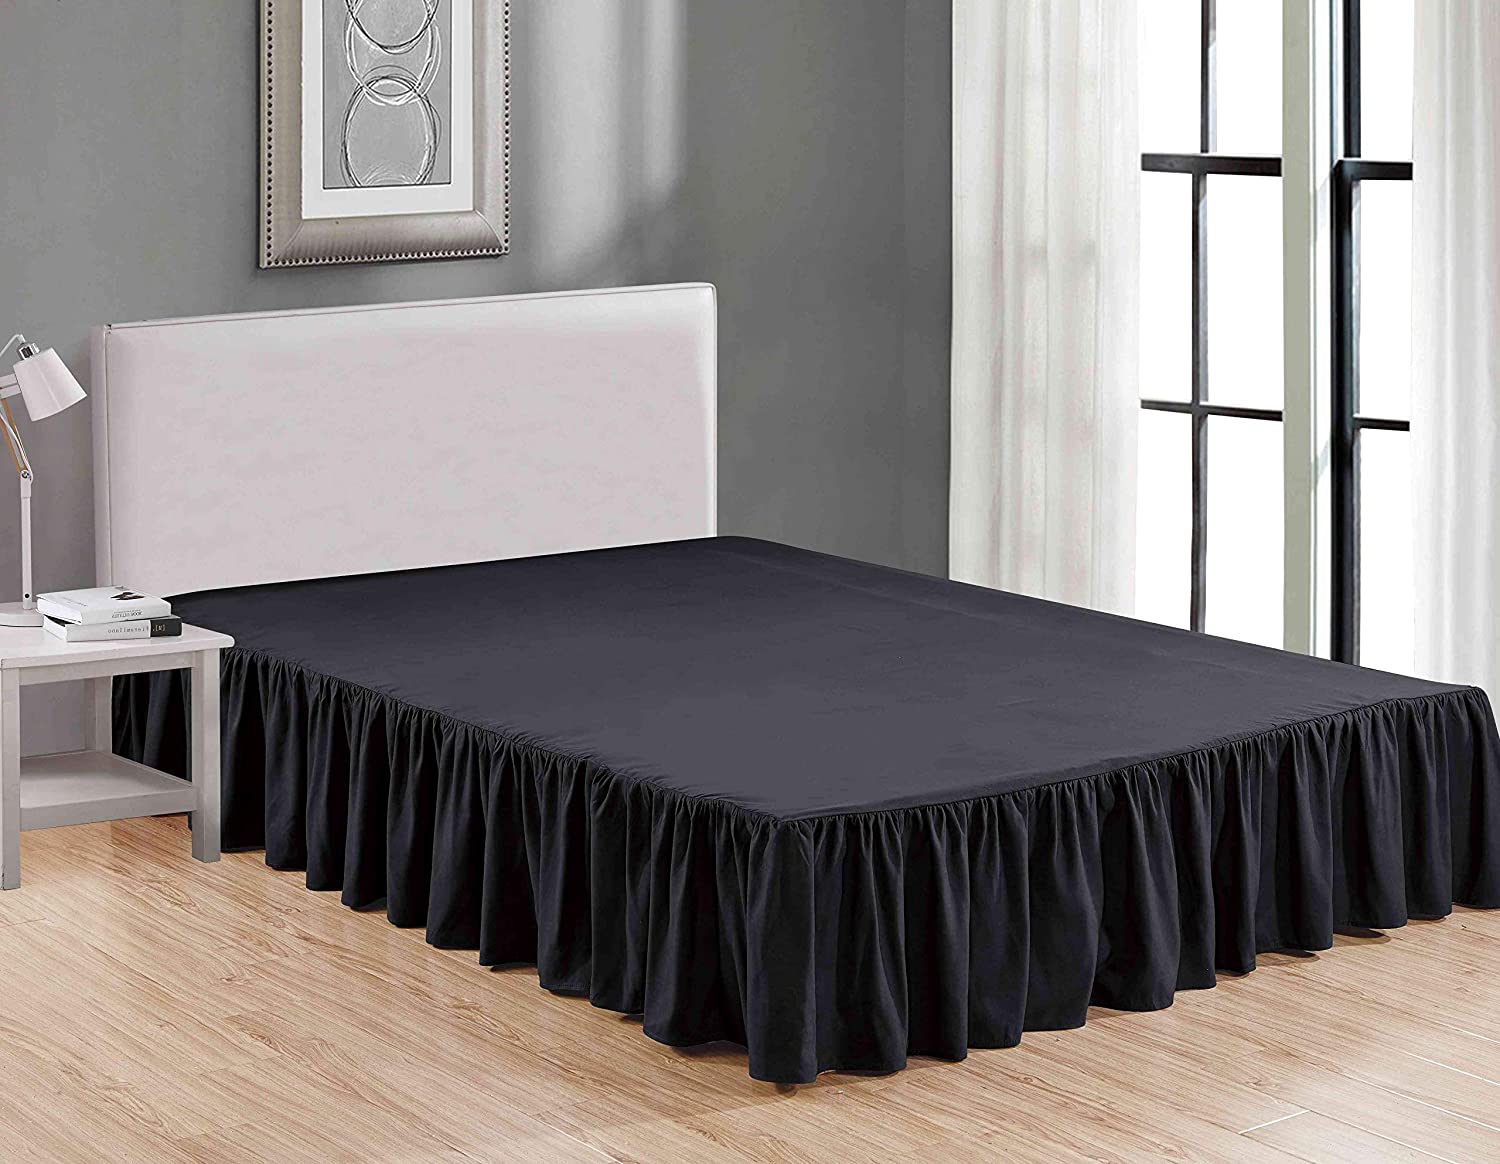 Sheets & Beyond Wrap Around Gathered Bed Skirt